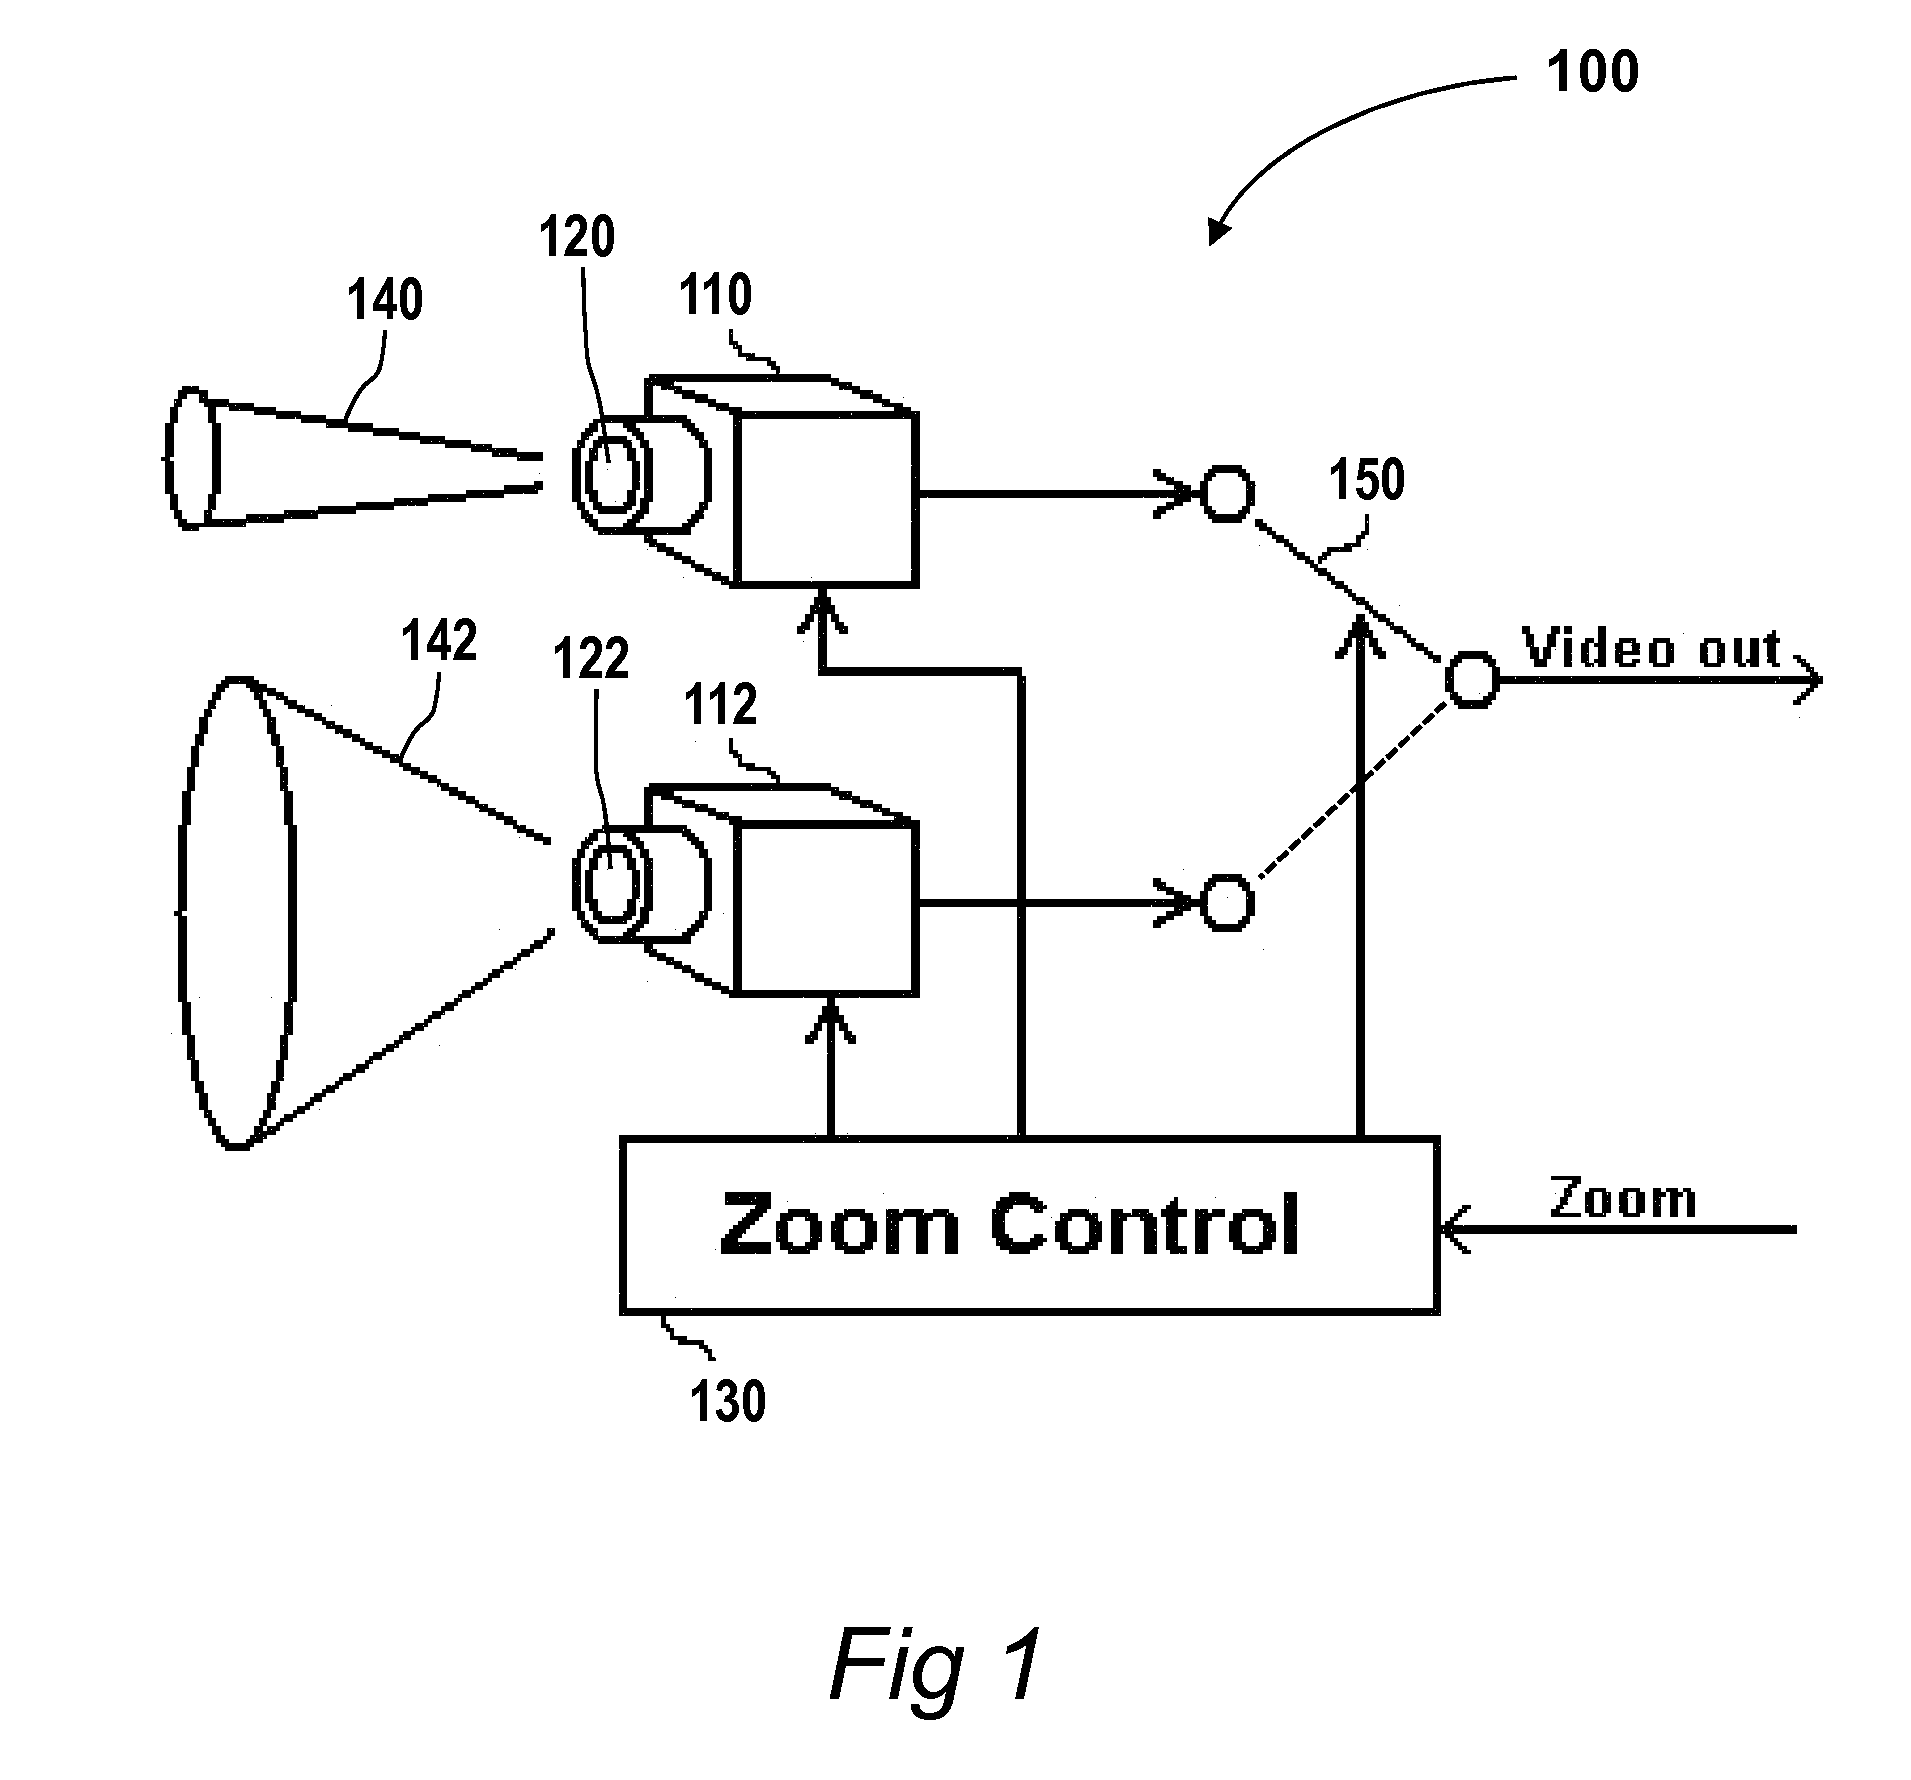 Continuous electronic zoom for an imaging system with multiple imaging devices having different fixed fov